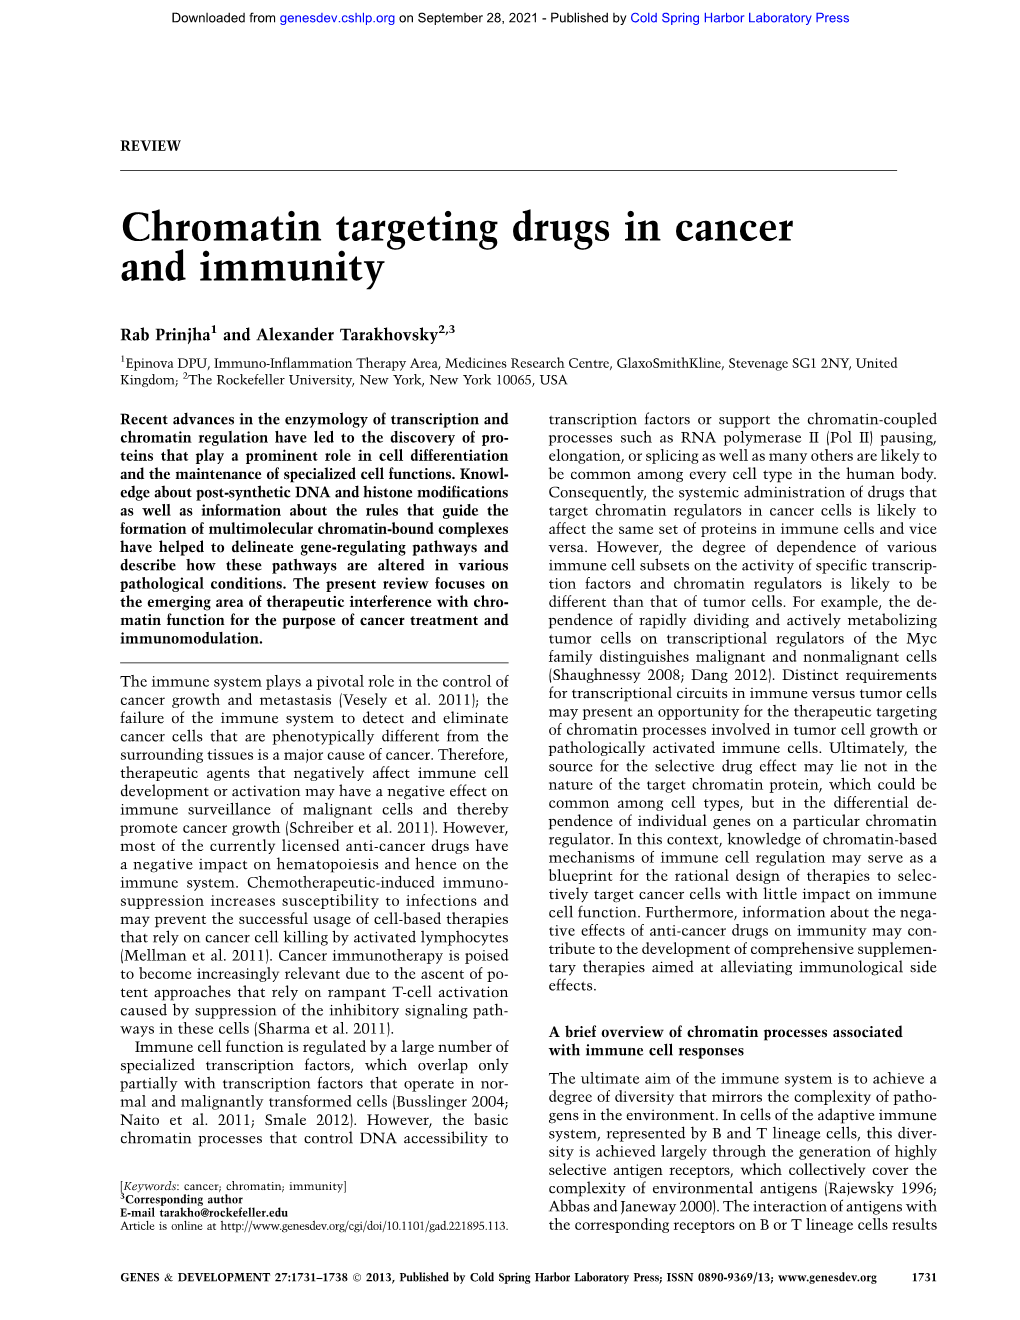 Chromatin Targeting Drugs in Cancer and Immunity